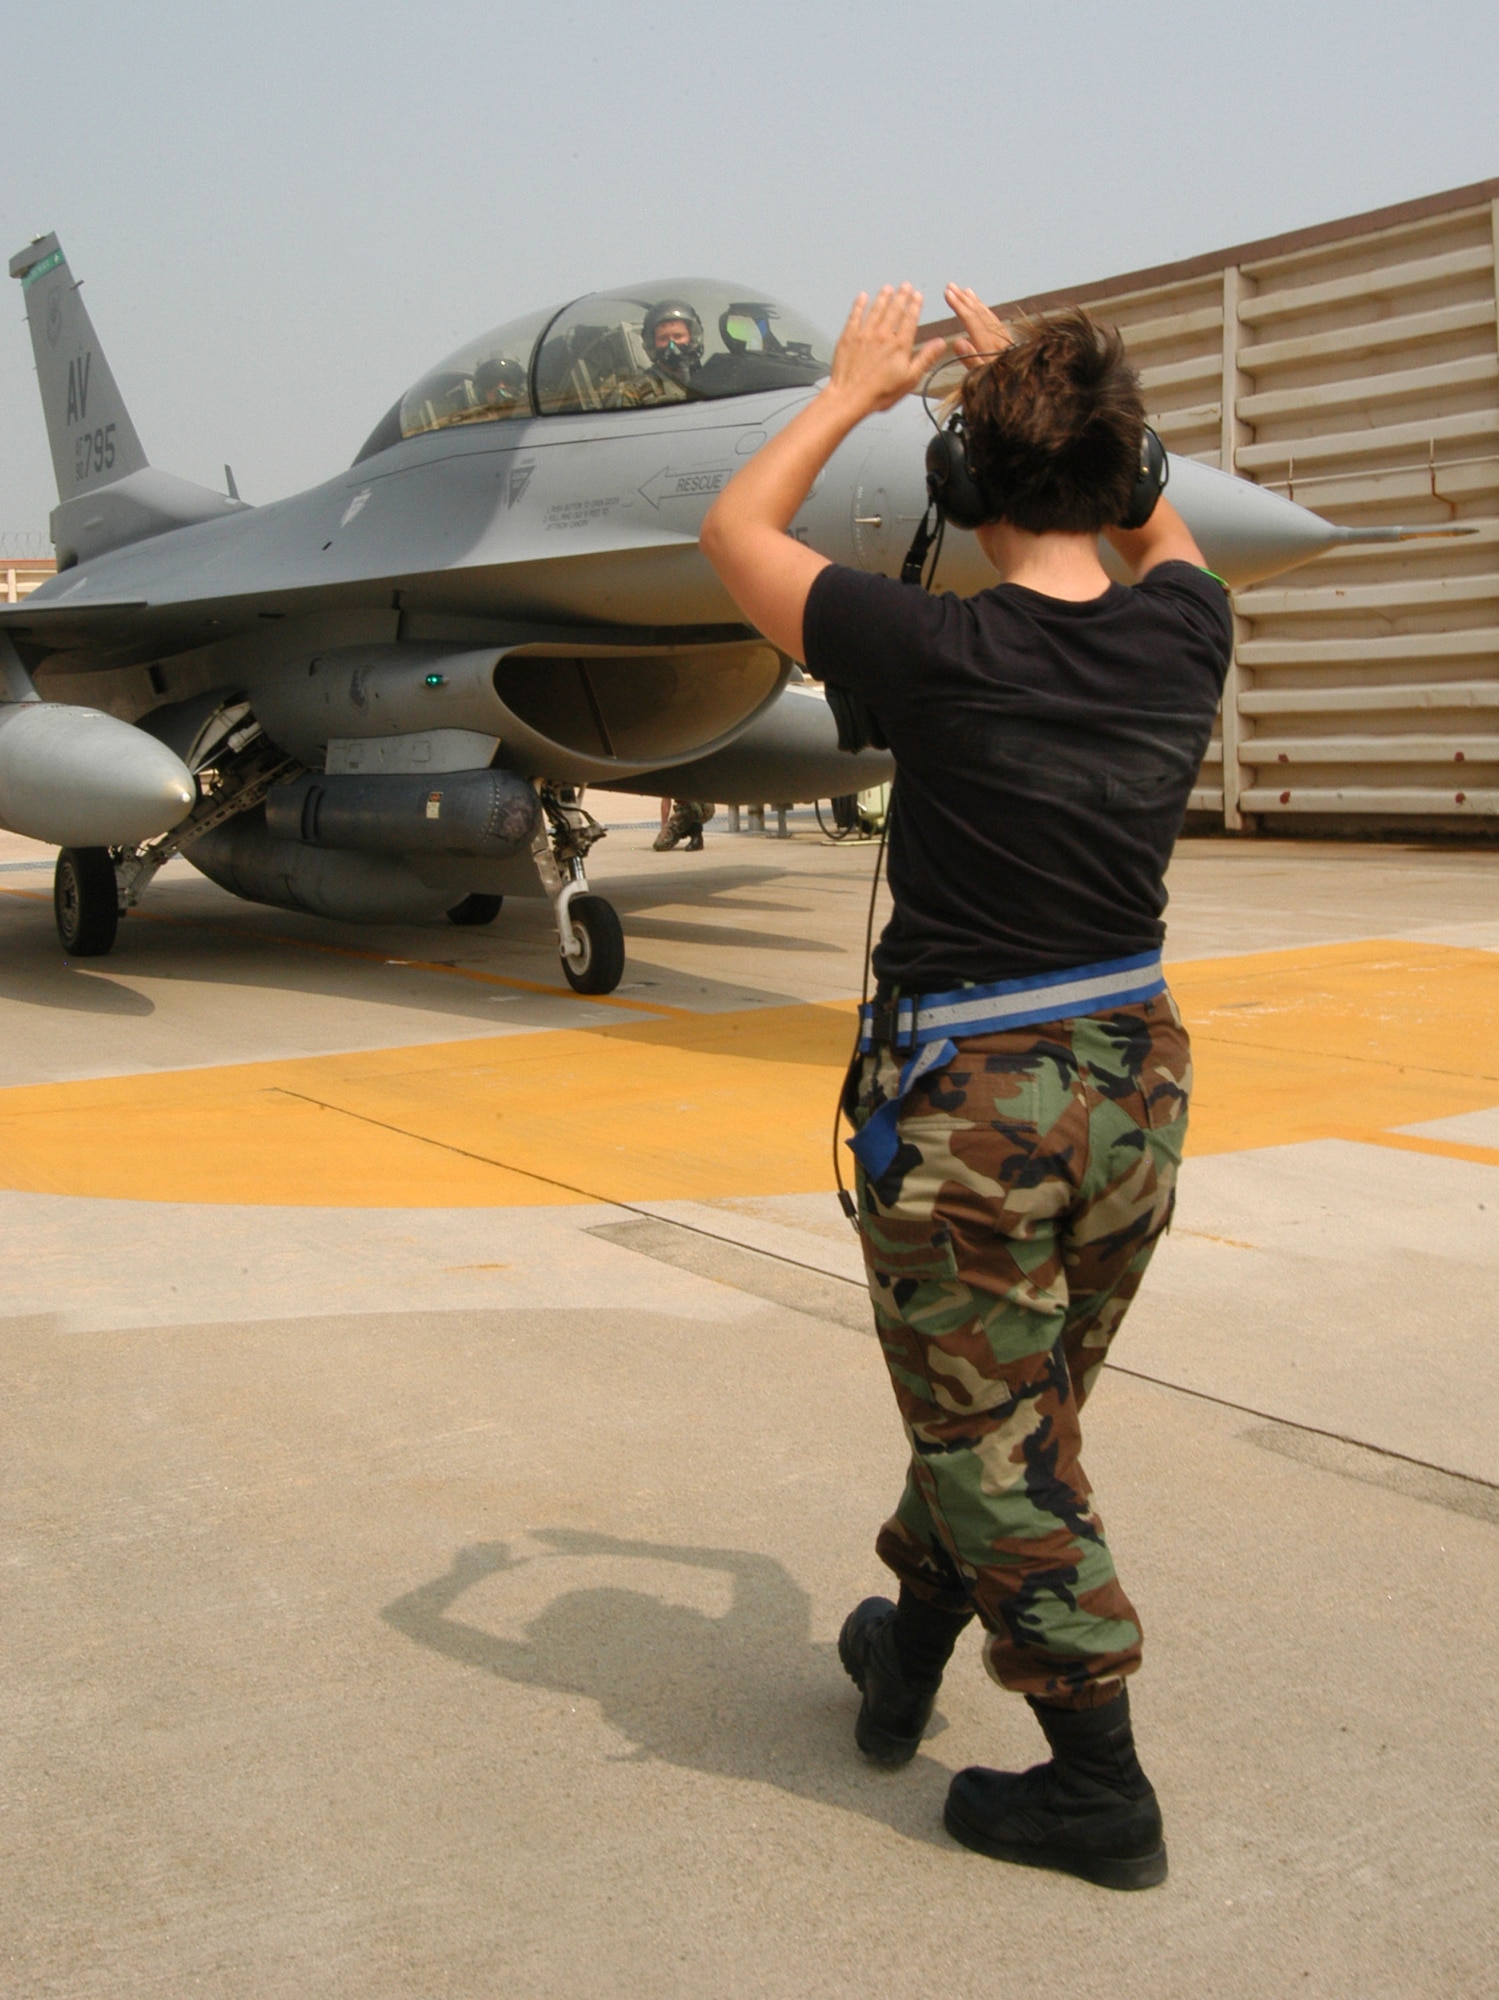 KUNSAN AIR BASE, Republic of Korea -- Senior Airman Kara Thornton, 555th Expeditionary Fighter Squadron assistant dedicated crew chief, marshals in a "Triple Nickel" F-16 Fighting Falcon from the squadron July 7. More than 10 aircraft assigned to 555th EFS arrived here from Alaska after being hampered by poor weather conditions. The Triple Nickel is deployed to Kunsan as part of a force posture adjustment in the Northeast Asia region. (U.S. Air Force photo/Senior Airman Stephen Collier)                                